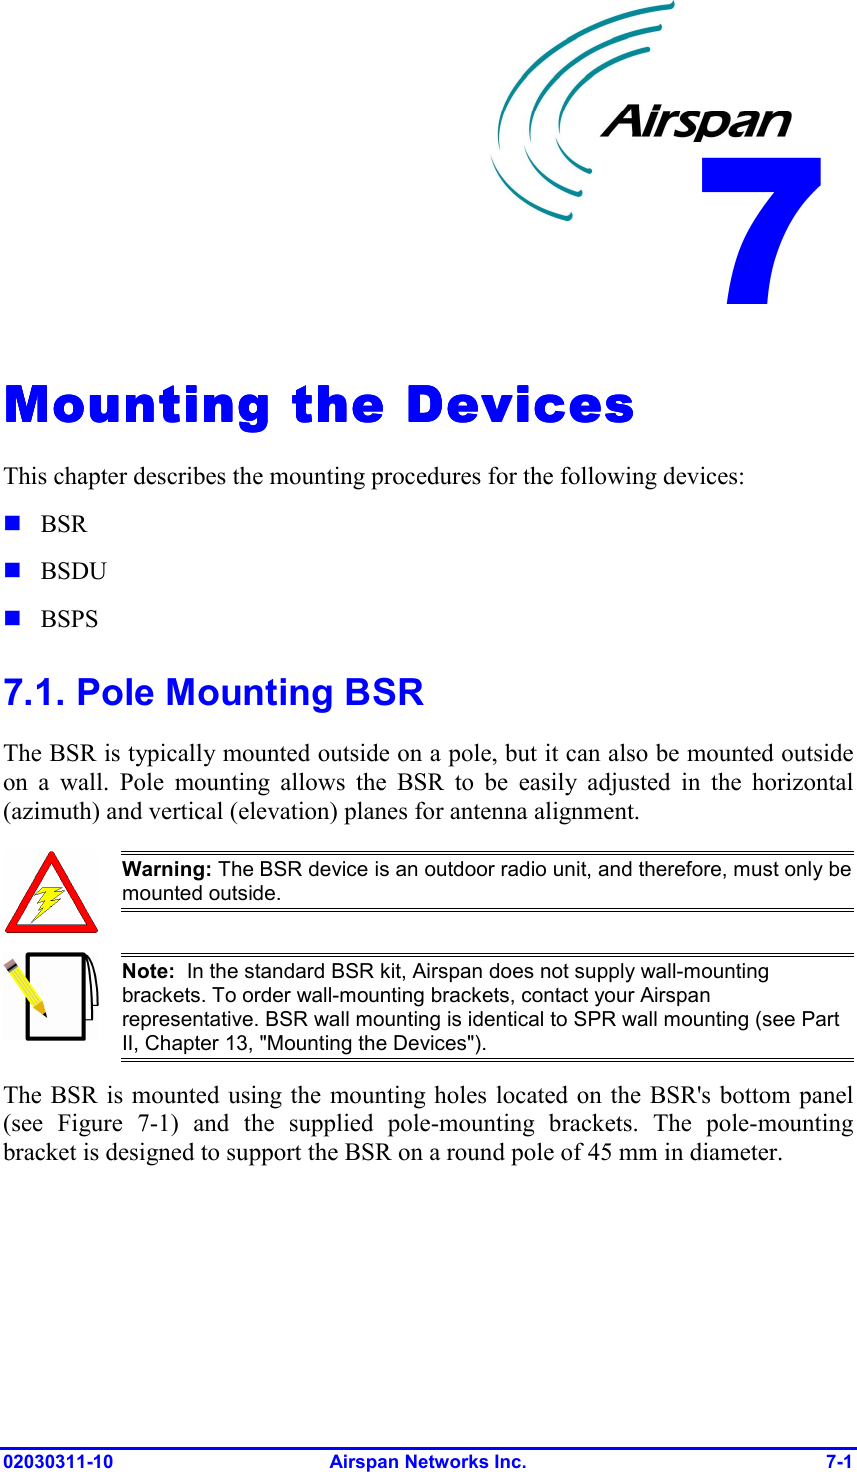  02030311-10 Airspan Networks Inc.  7-1 Mounting the DevicesMounting the DevicesMounting the DevicesMounting the Devices    This chapter describes the mounting procedures for the following devices:  BSR  BSDU  BSPS 7.1. Pole Mounting BSR The BSR is typically mounted outside on a pole, but it can also be mounted outside on a wall. Pole mounting allows the BSR to be easily adjusted in the horizontal (azimuth) and vertical (elevation) planes for antenna alignment.   Warning: The BSR device is an outdoor radio unit, and therefore, must only be mounted outside.  Note:  In the standard BSR kit, Airspan does not supply wall-mounting brackets. To order wall-mounting brackets, contact your Airspan representative. BSR wall mounting is identical to SPR wall mounting (see Part II, Chapter 13, &quot;Mounting the Devices&quot;). The BSR is mounted using the mounting holes located on the BSR&apos;s bottom panel (see Figure  7-1) and the supplied pole-mounting brackets. The pole-mounting bracket is designed to support the BSR on a round pole of 45 mm in diameter. 8 7 